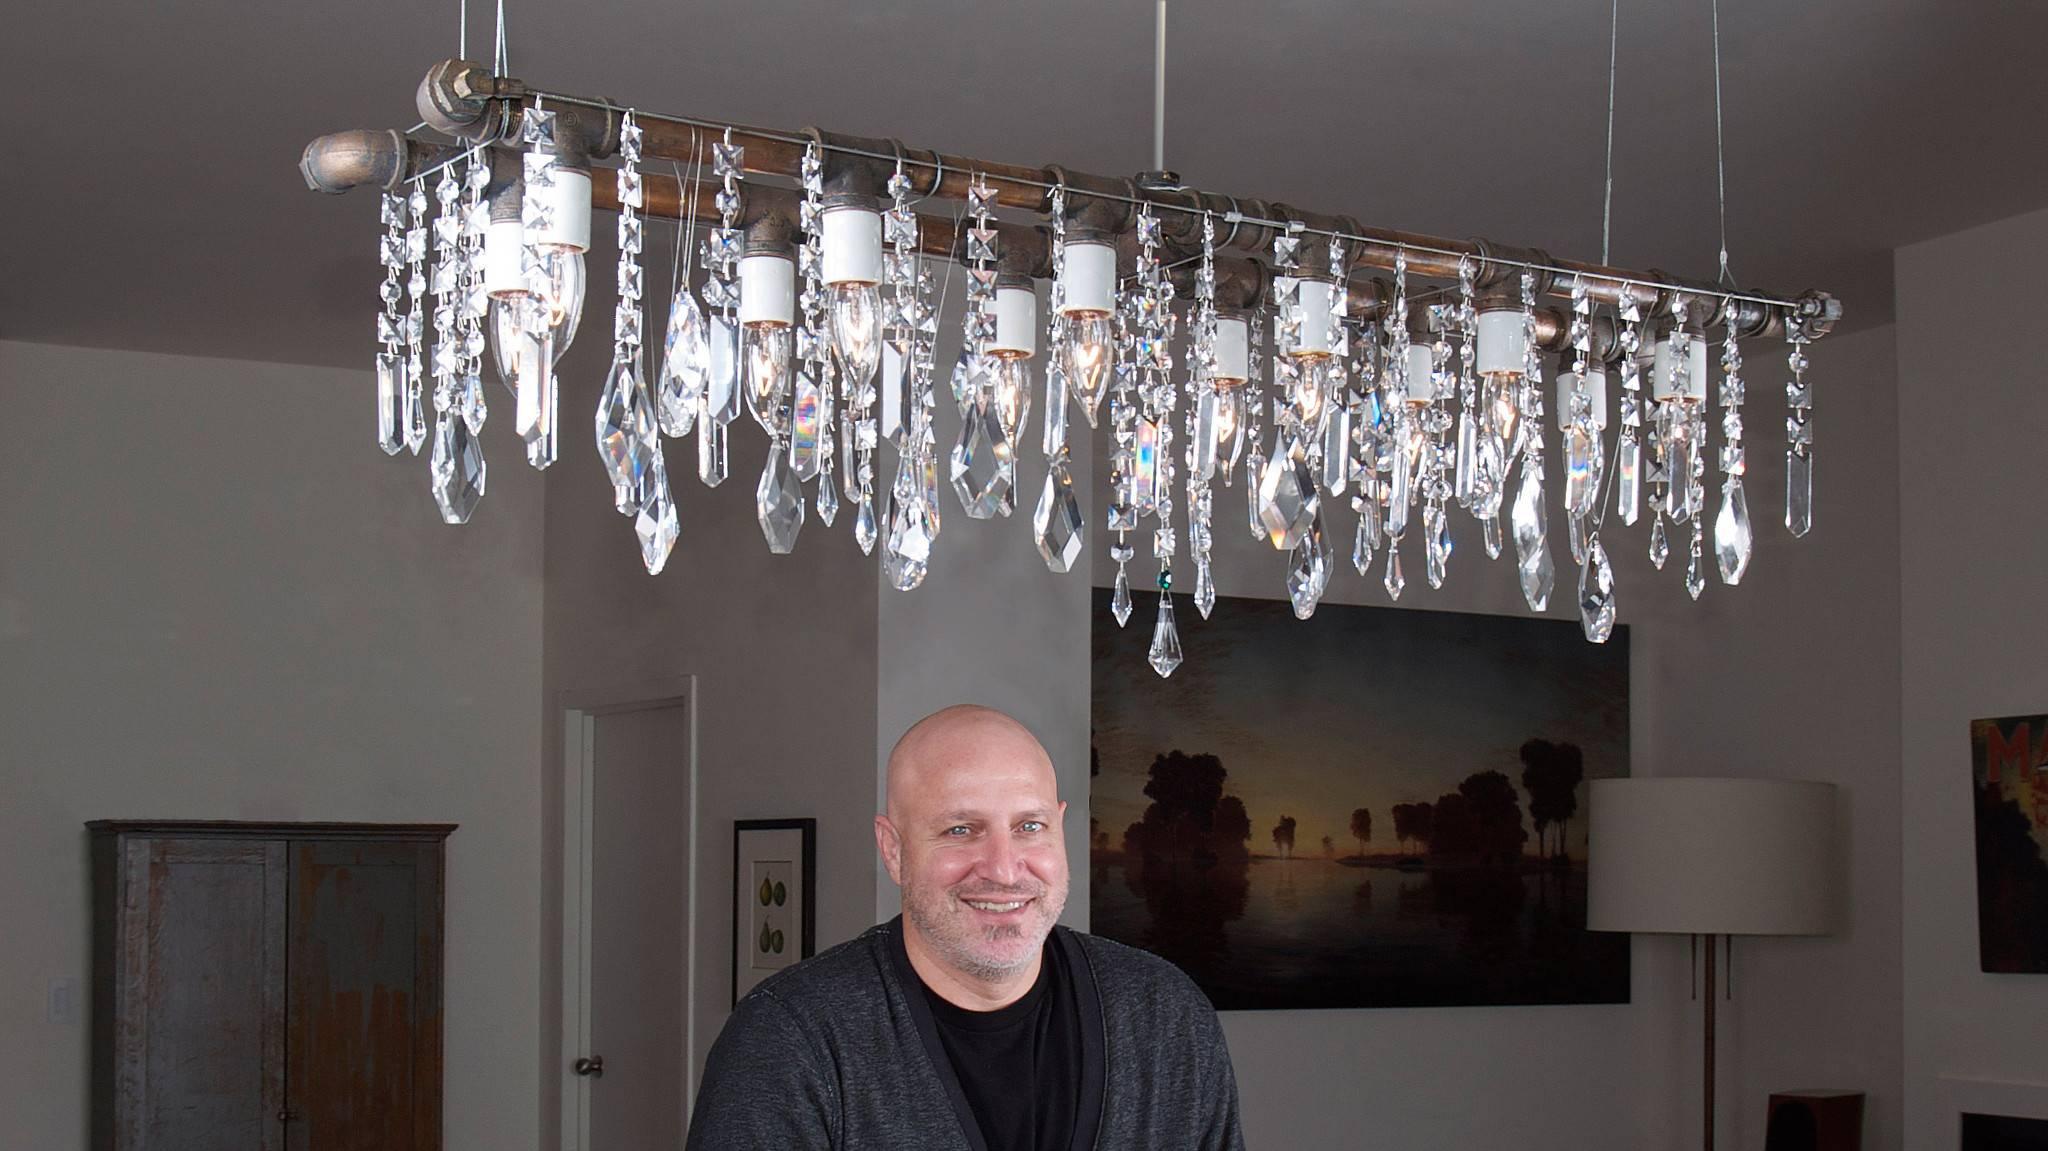 The mother of all banqueting chandeliers, the Industrial collection was our very first banqueting chandelier and the one with earned our reputation. The difference between this fixture and the Tribeca Banqueting Chandelier? Good question. Here are